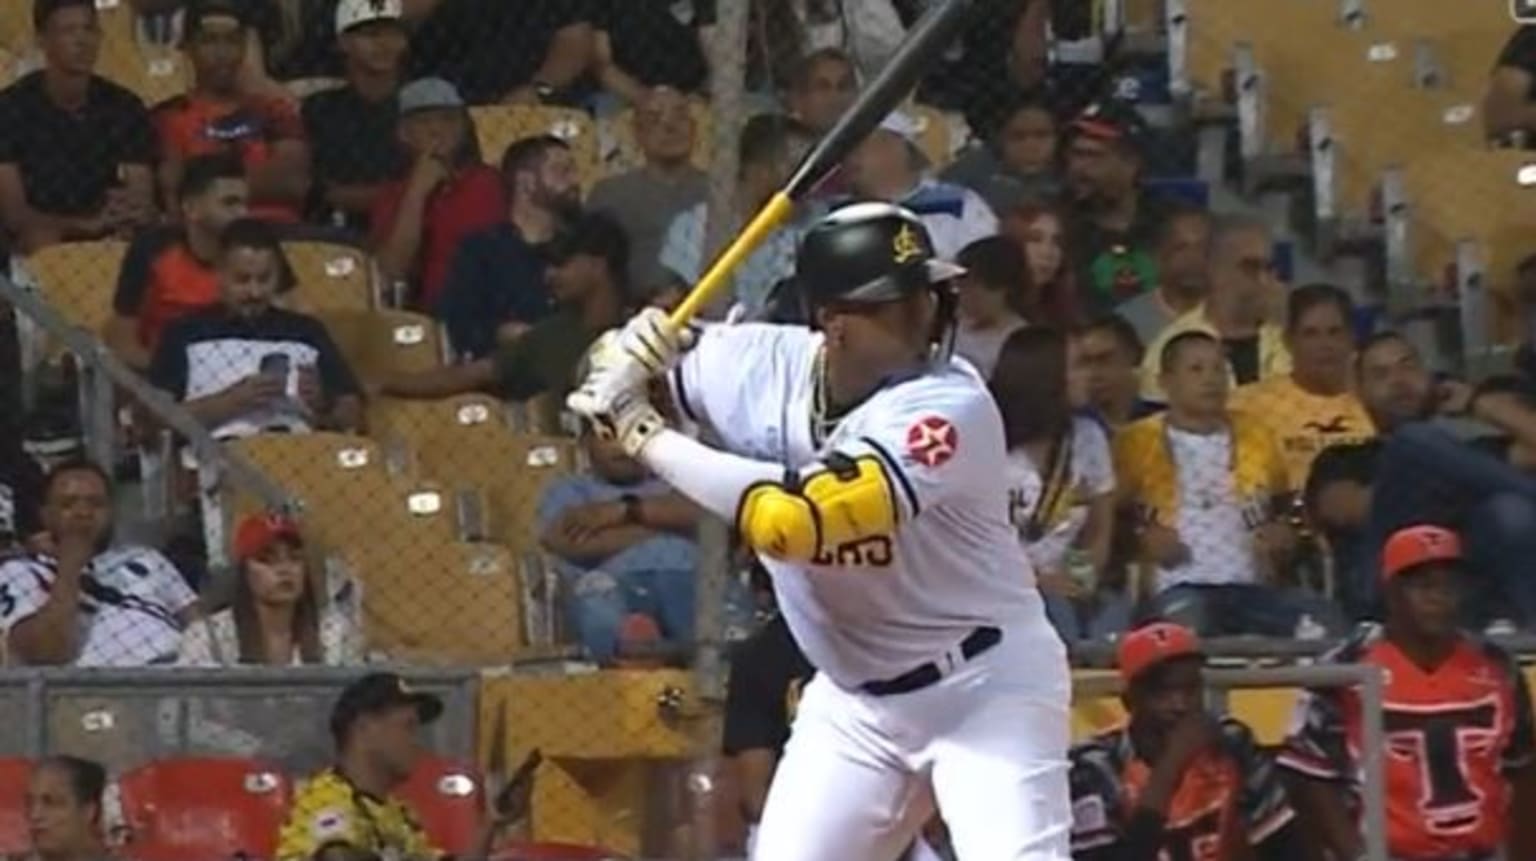 Yoenis Cespedes at bat in a white uniform in front of fans in yellow seats